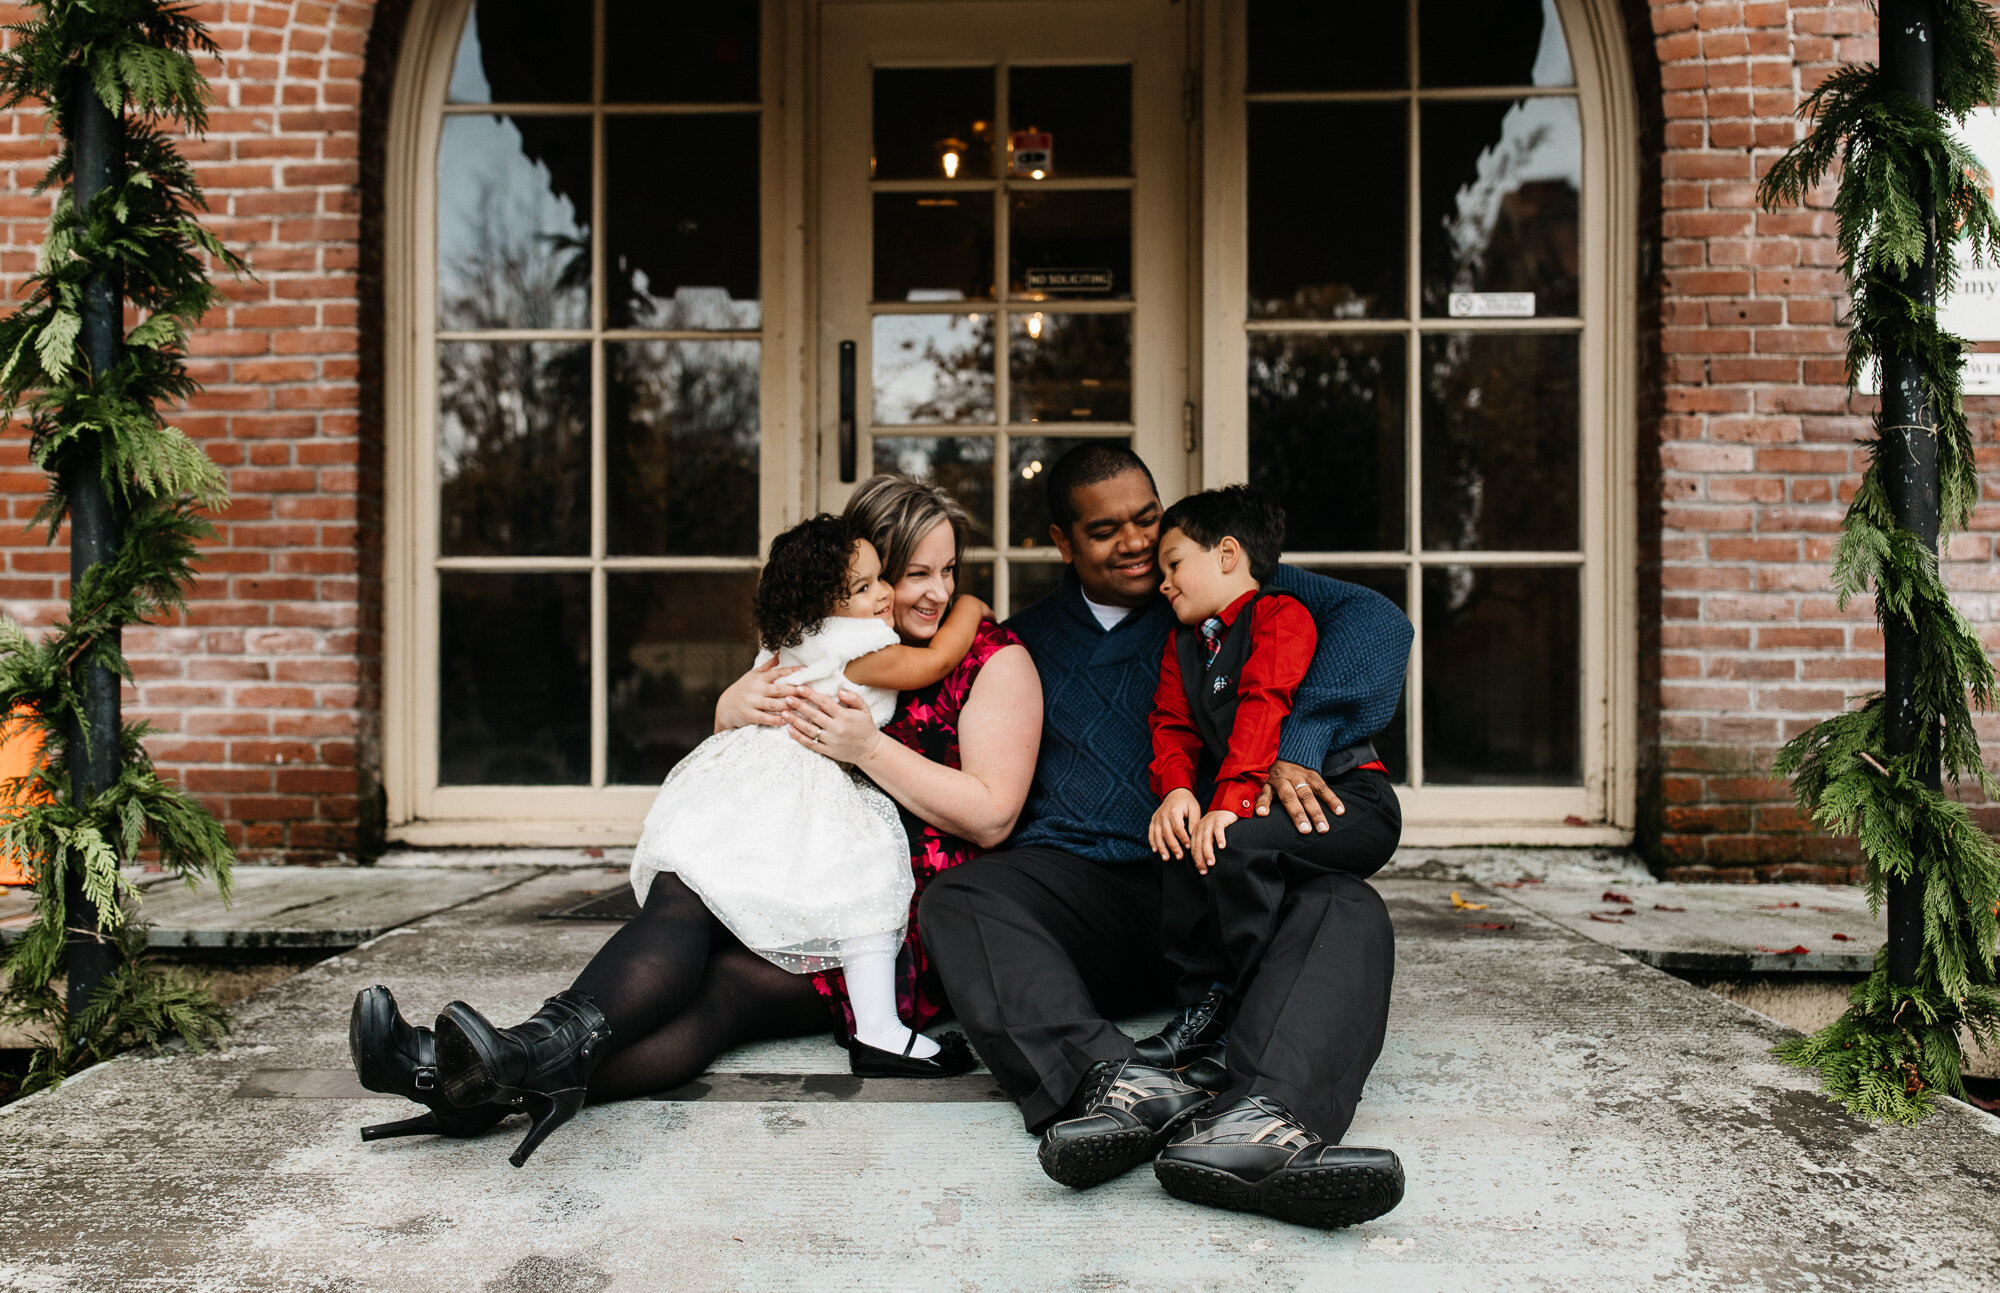 The best time of year for outdoor portrait photography | family of four at The Academy Church near Portland, Oregon.